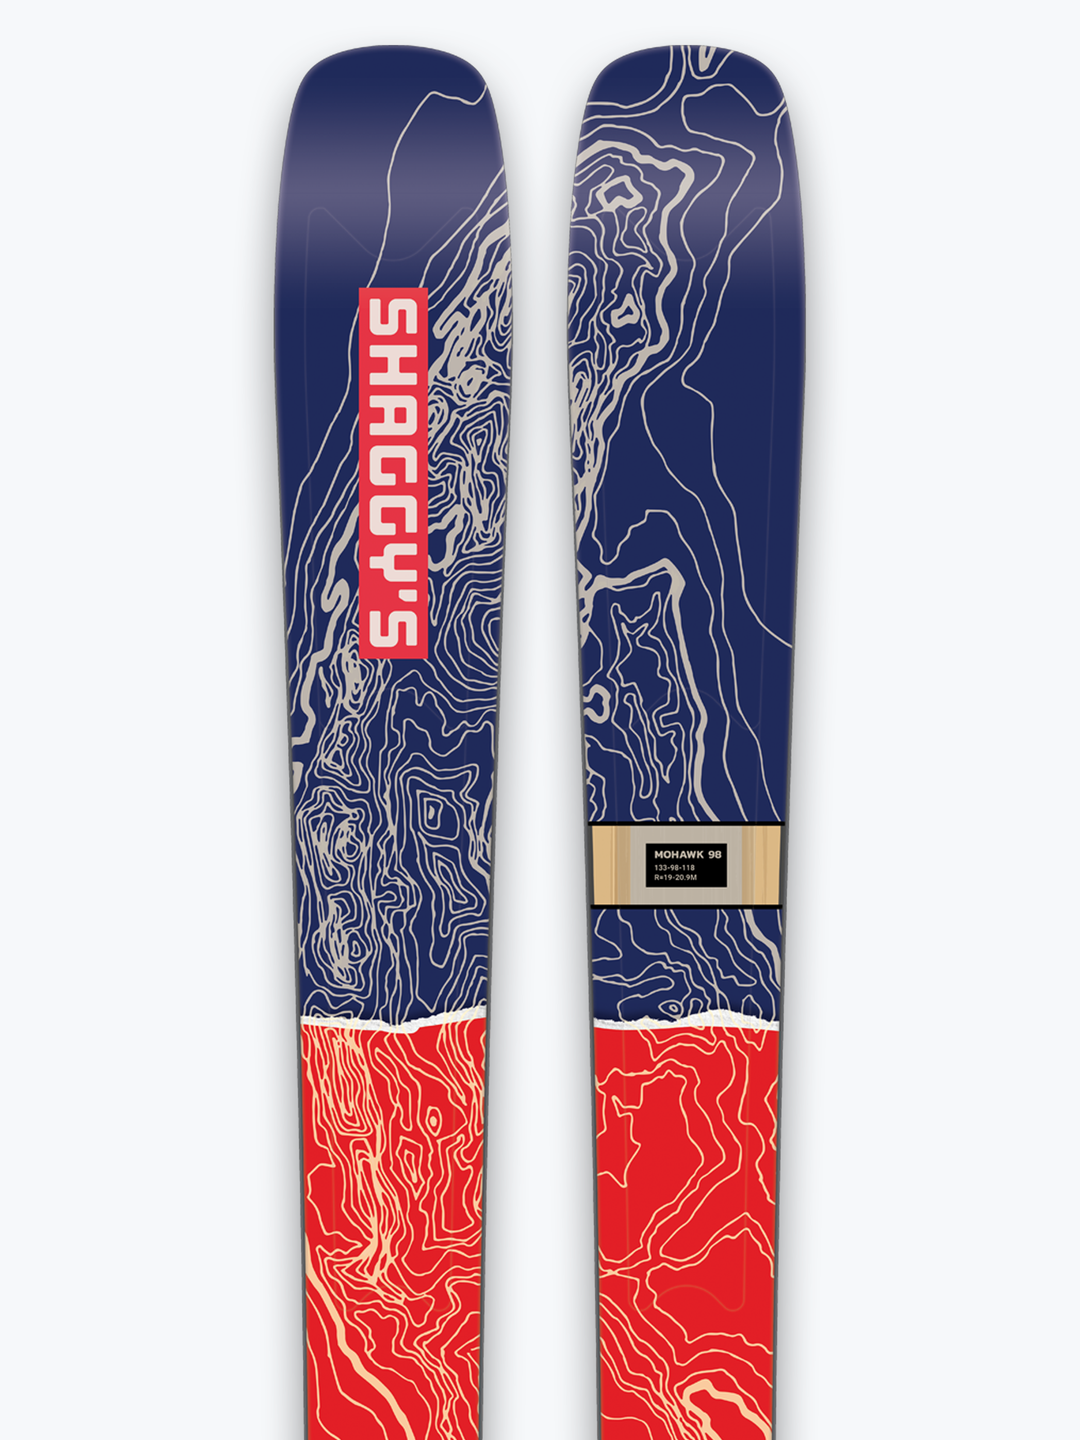 Mohawk 98 - Skis FC1 – Shaggy\'s Country Copper